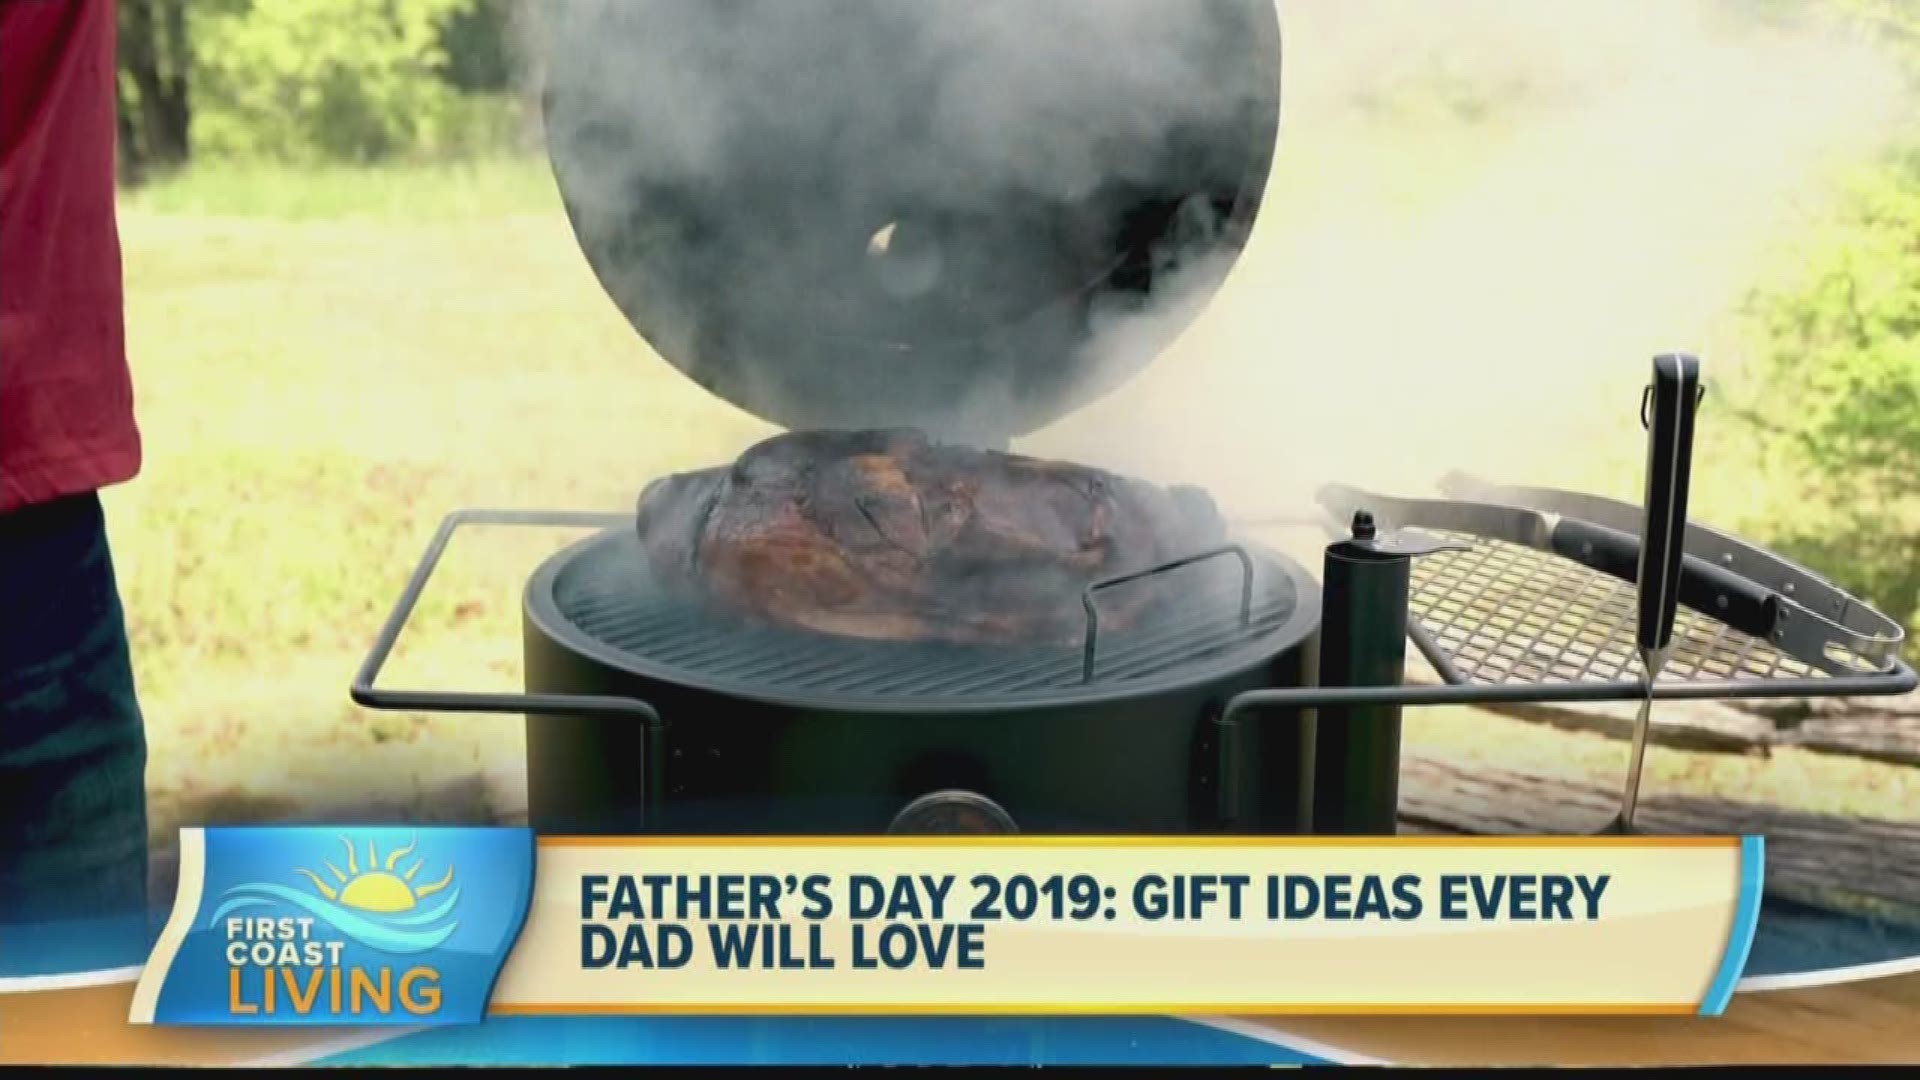 Gift ideas that dad will not only use but will enjoy this Father's Day.